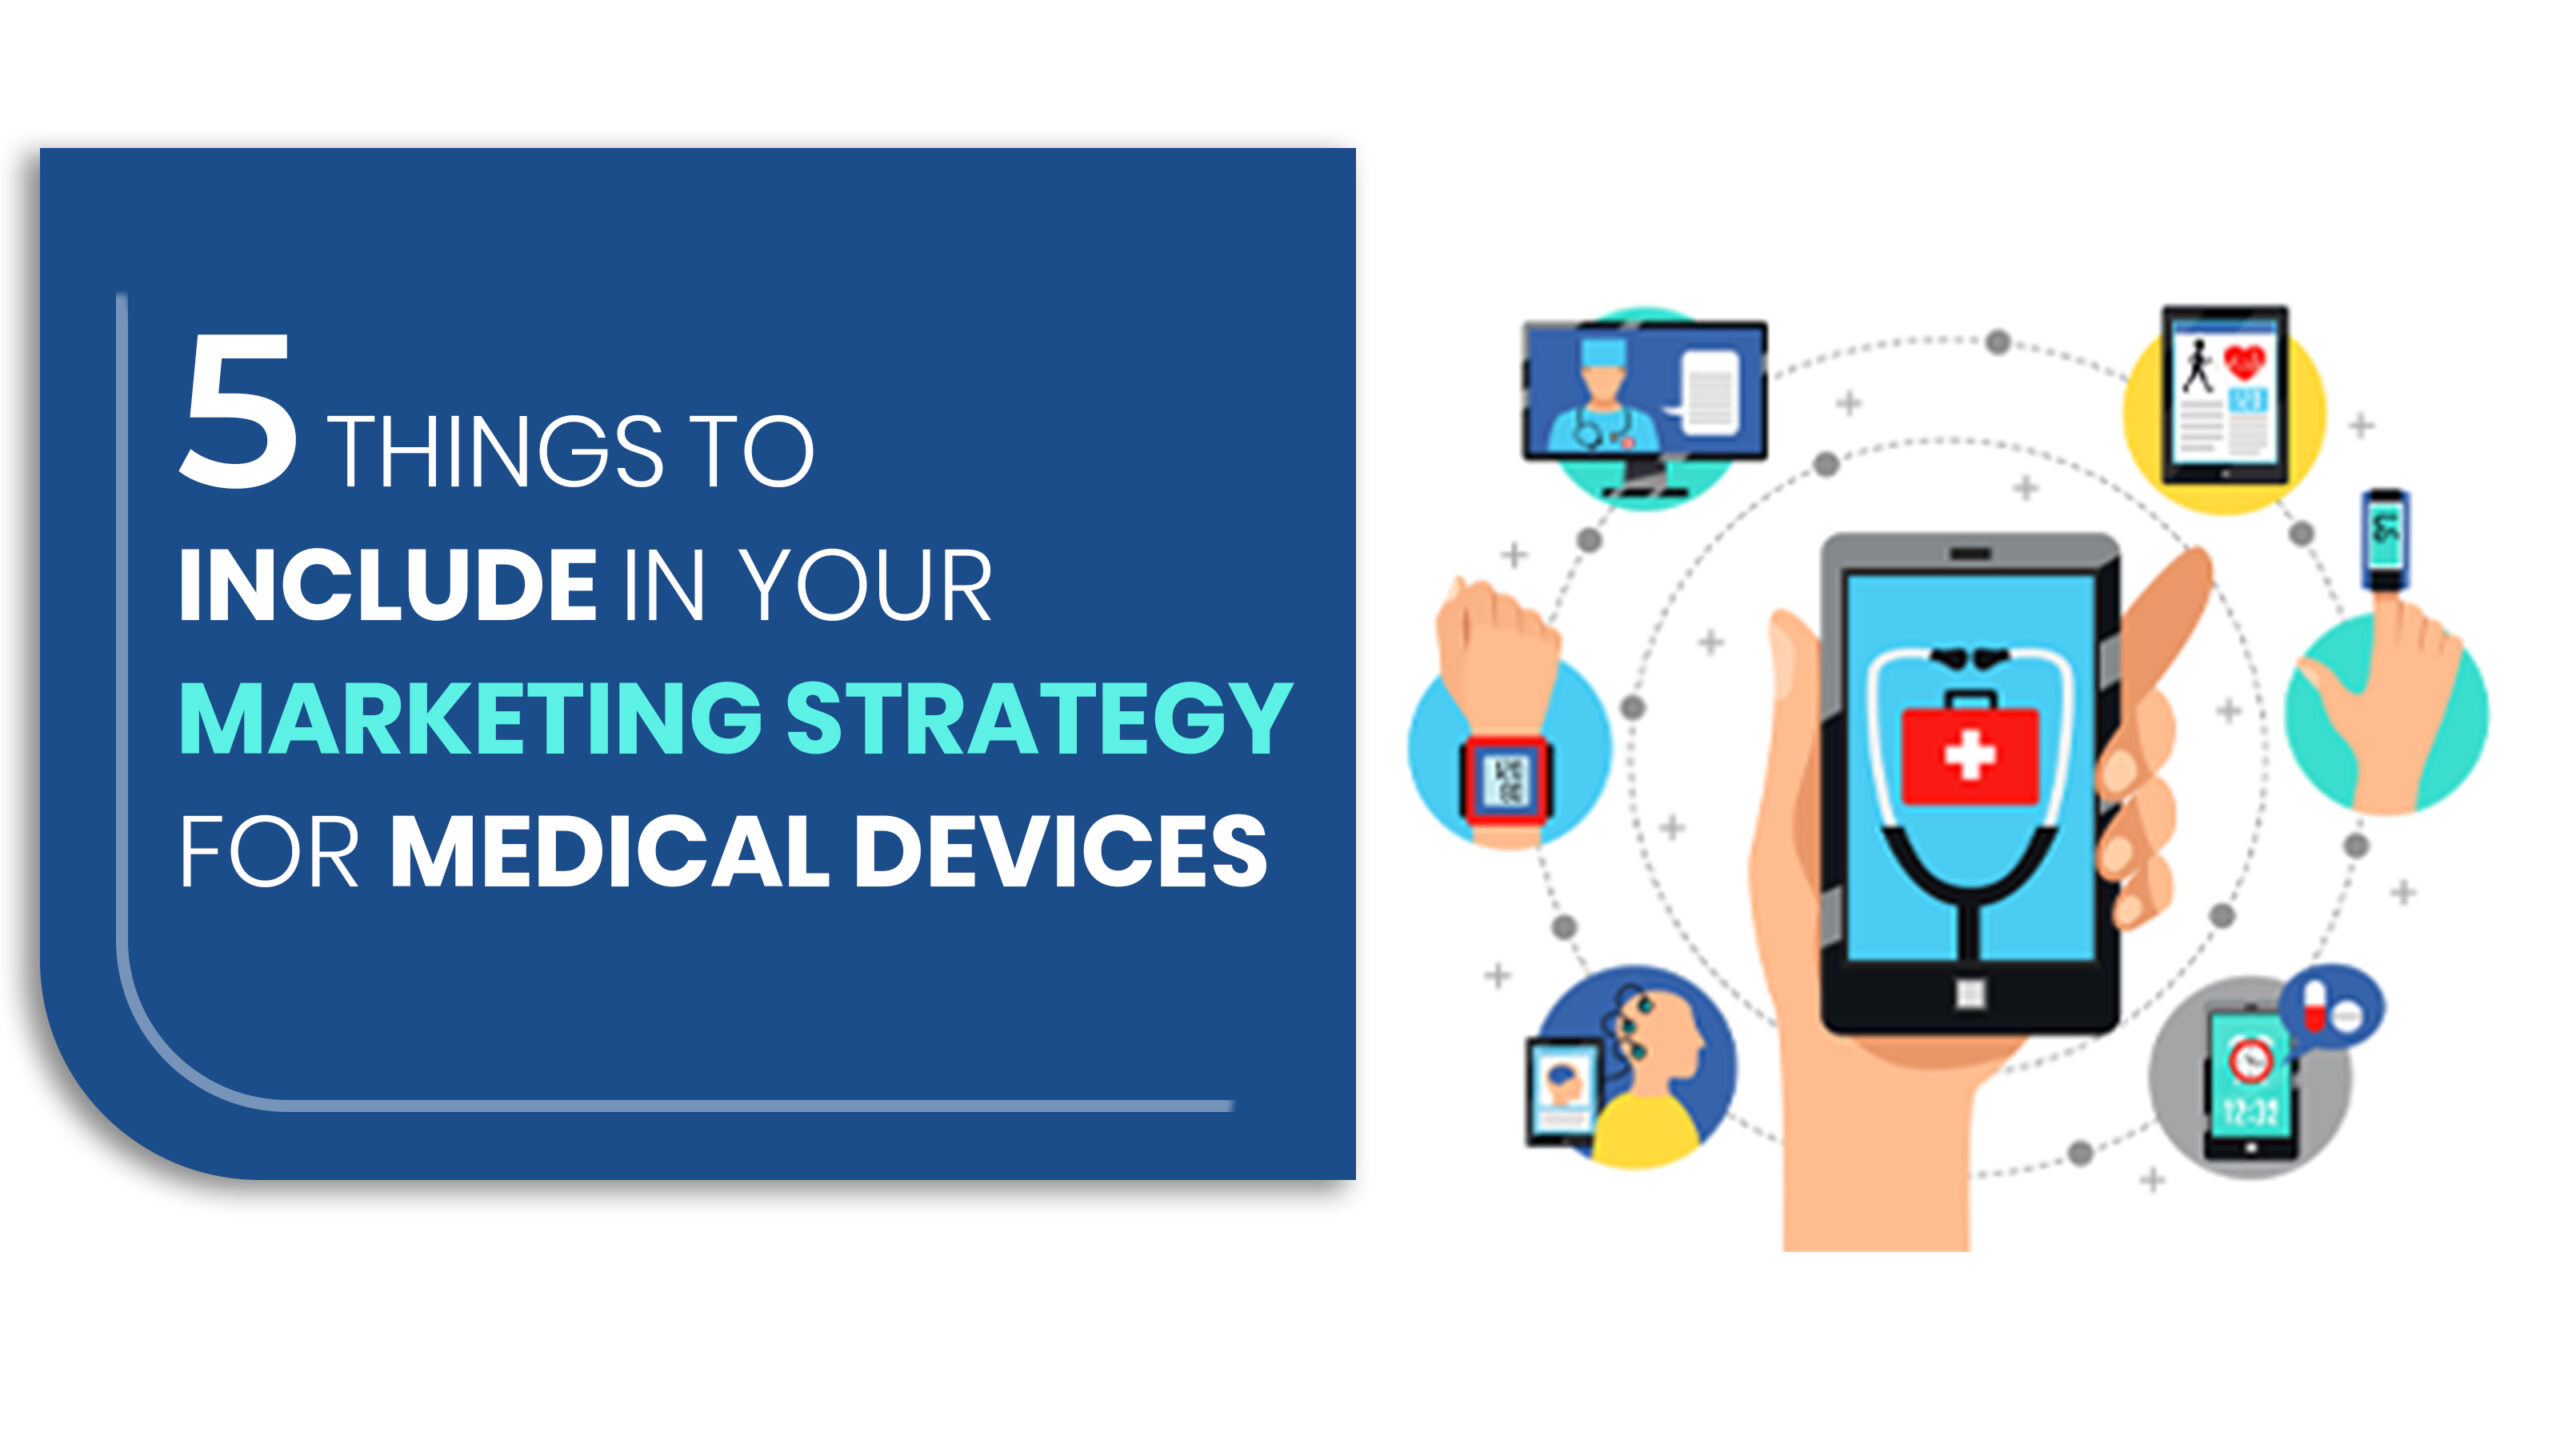 5 Things to Include in your Marketing Strategy for Medical devices